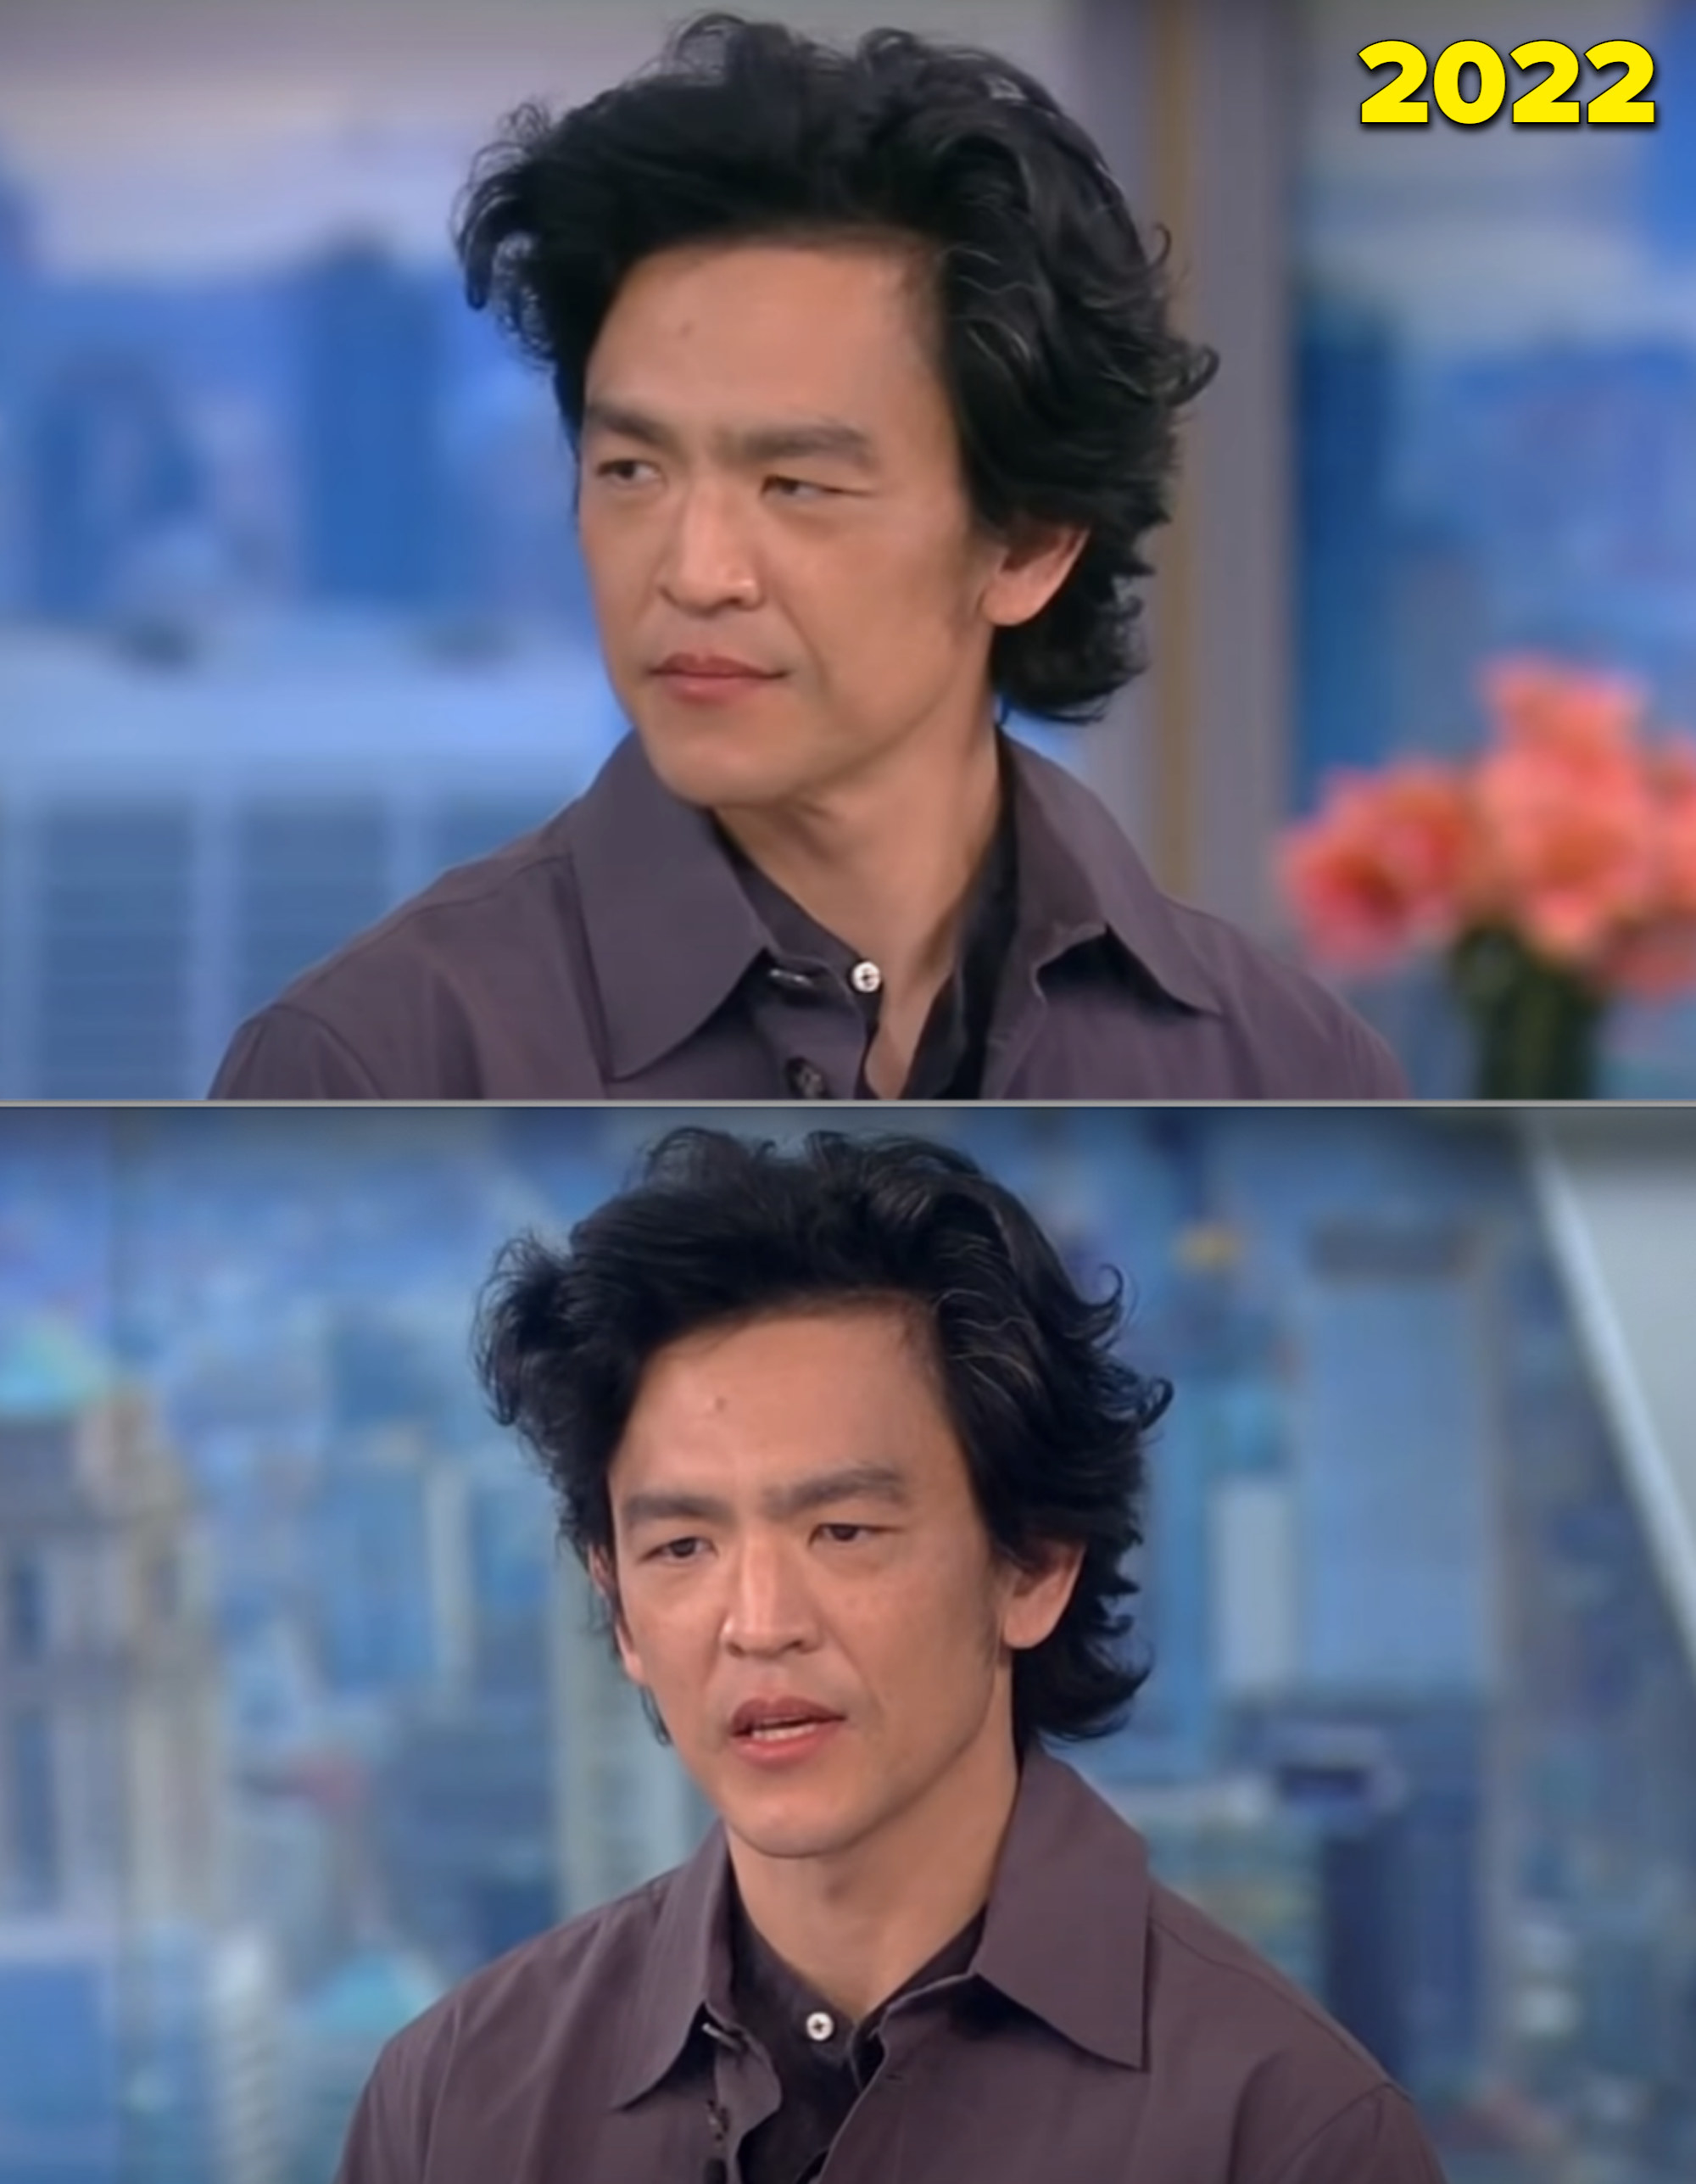 John Cho being interviewed on &quot;The View&quot; in 2022